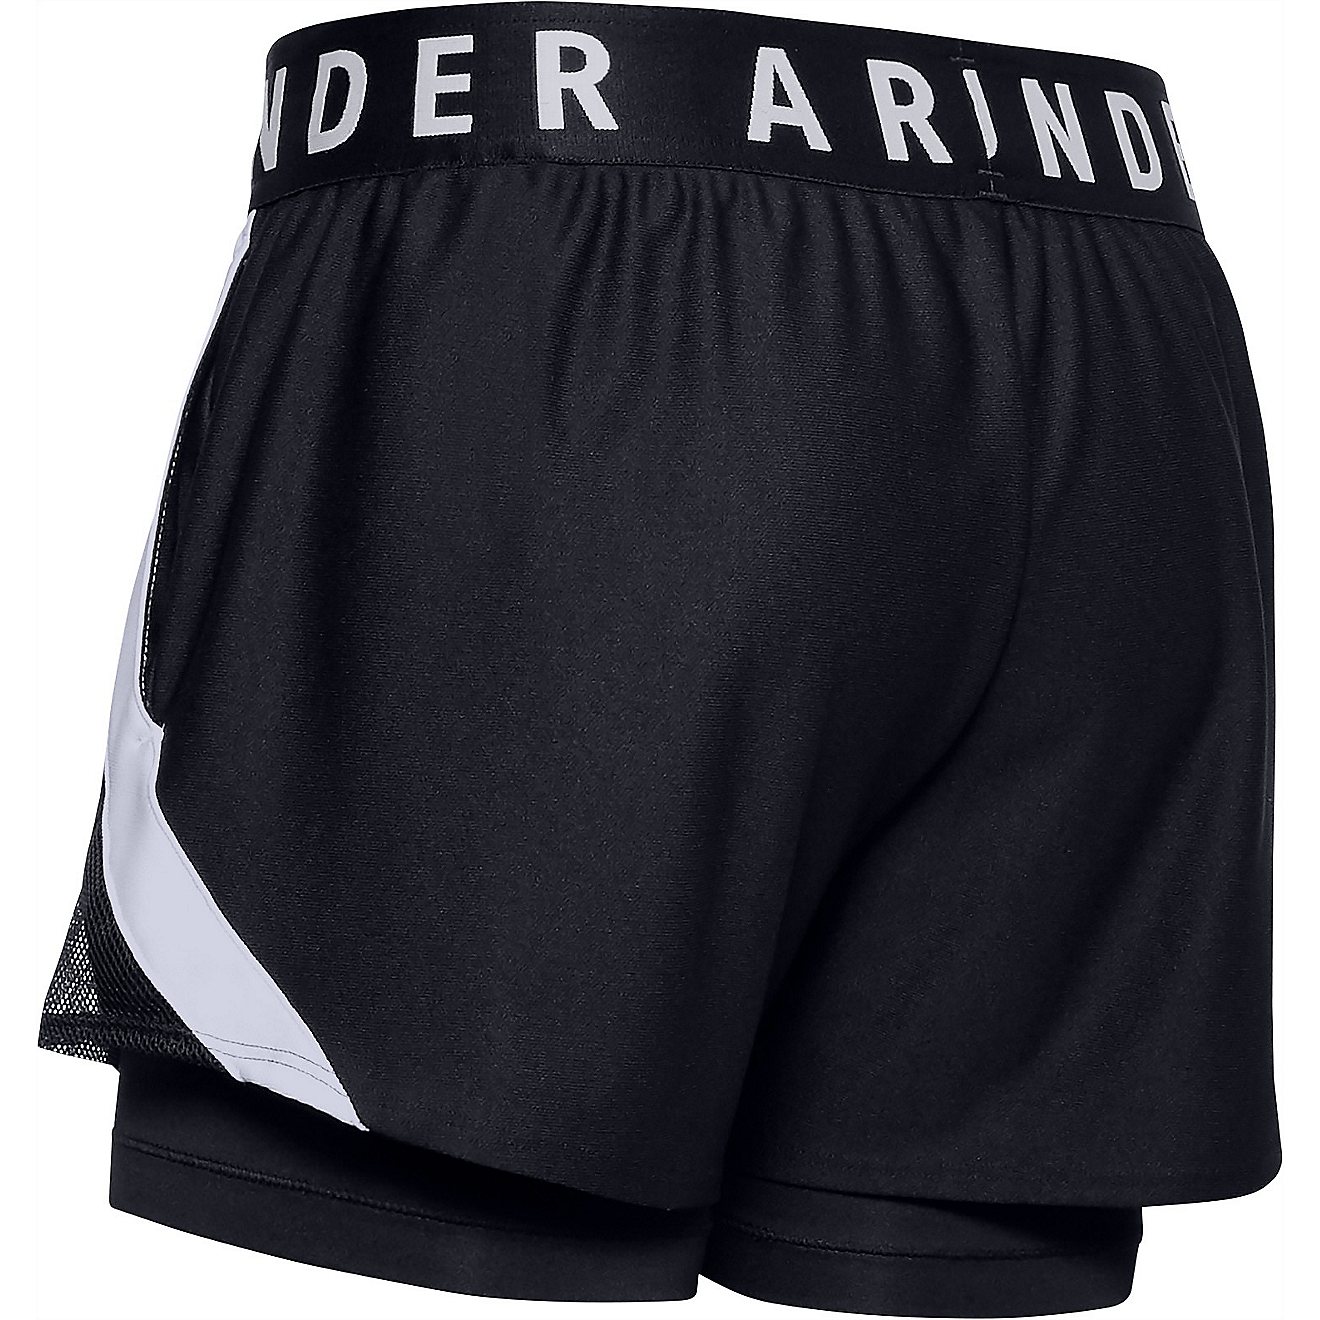 Under Armour Women's Play Up 2-in-1 Shorts                                                                                       - view number 5